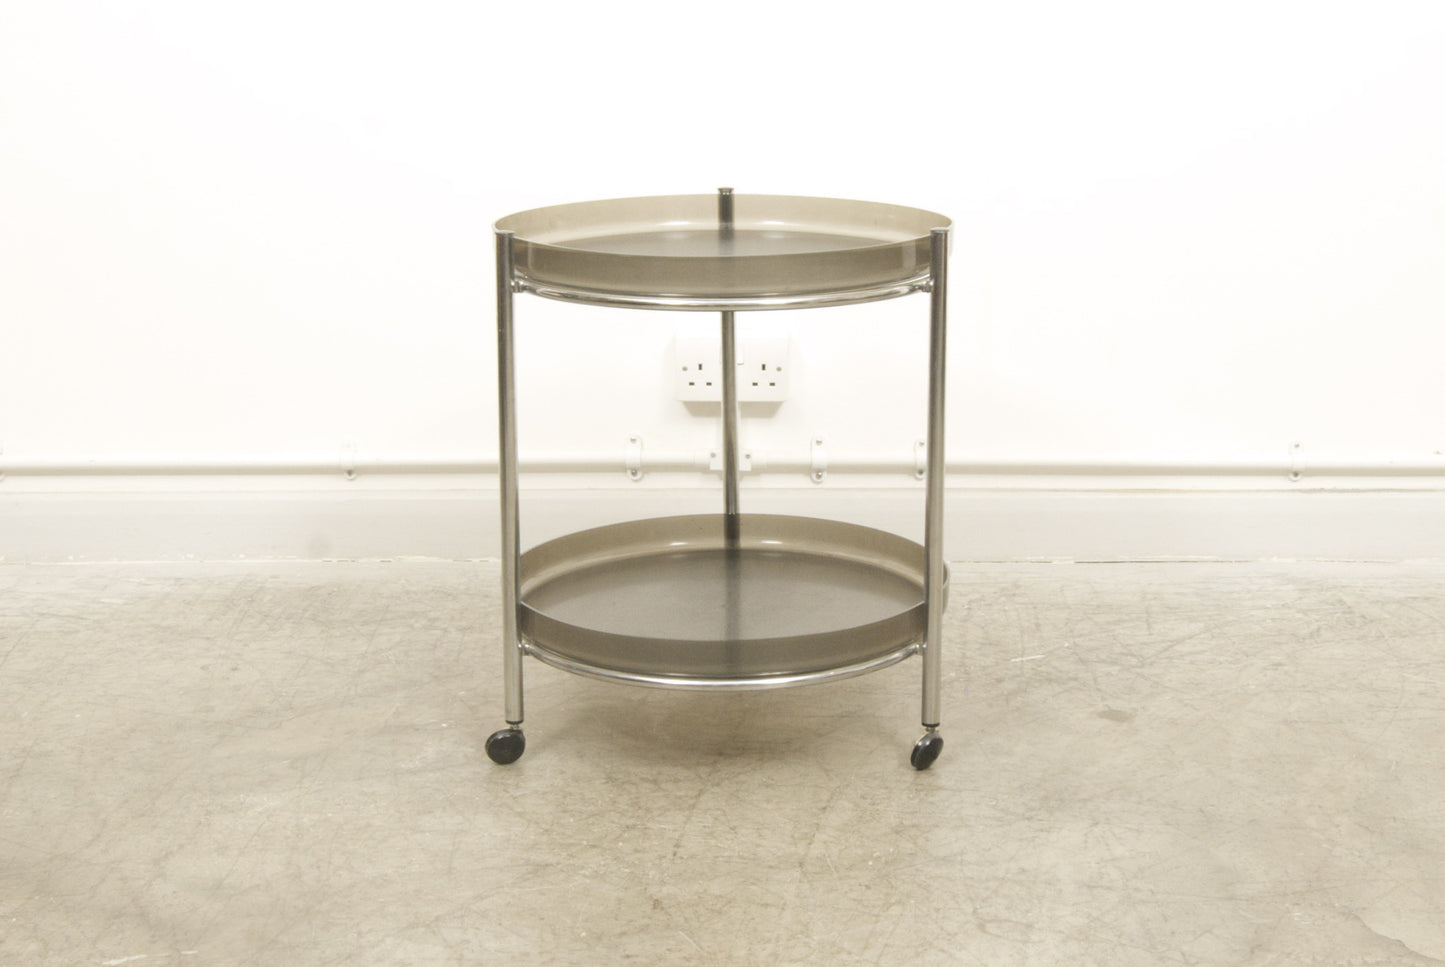 Trolley table by BKS